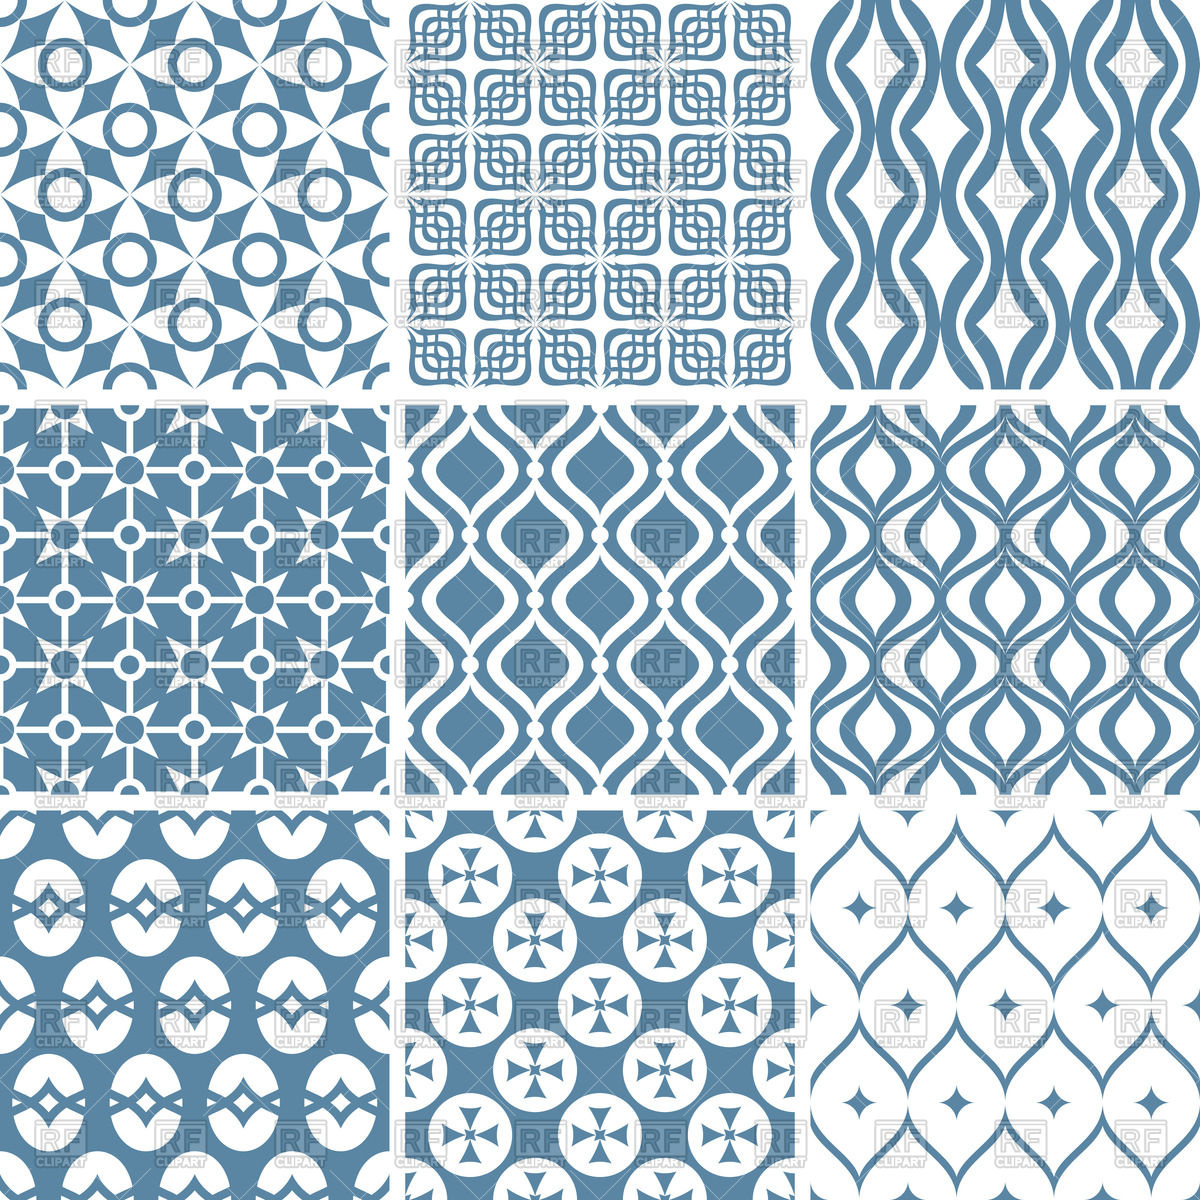 Blue And White Simple Seamless Geometric Patterns Royalty - Blue And White Geometric Pattern - HD Wallpaper 